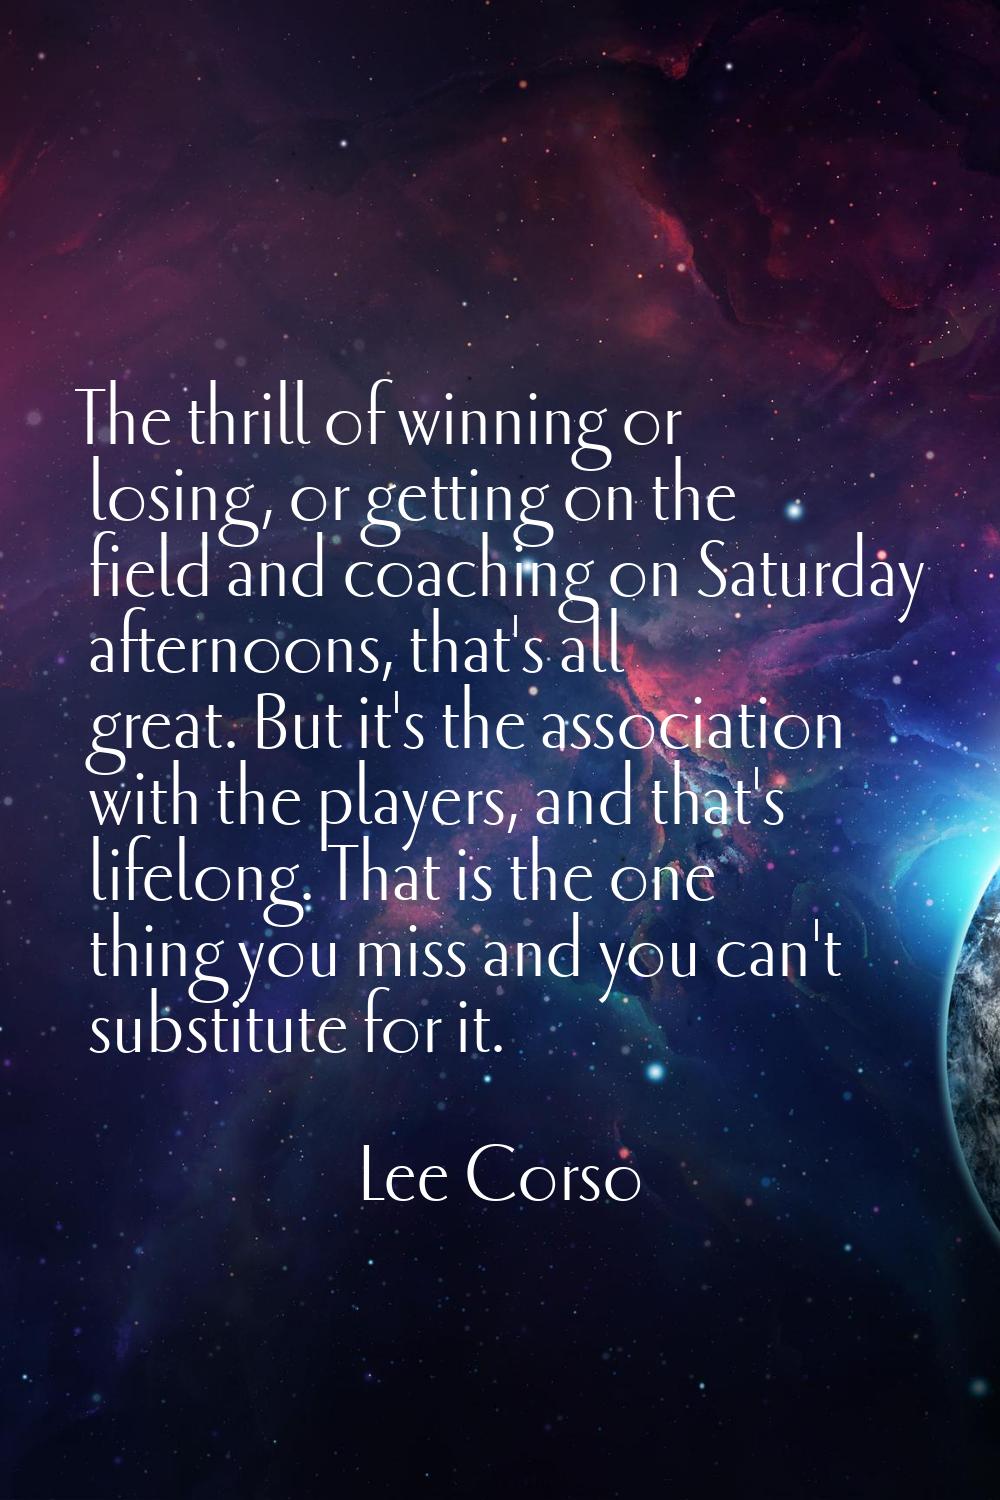 The thrill of winning or losing, or getting on the field and coaching on Saturday afternoons, that'